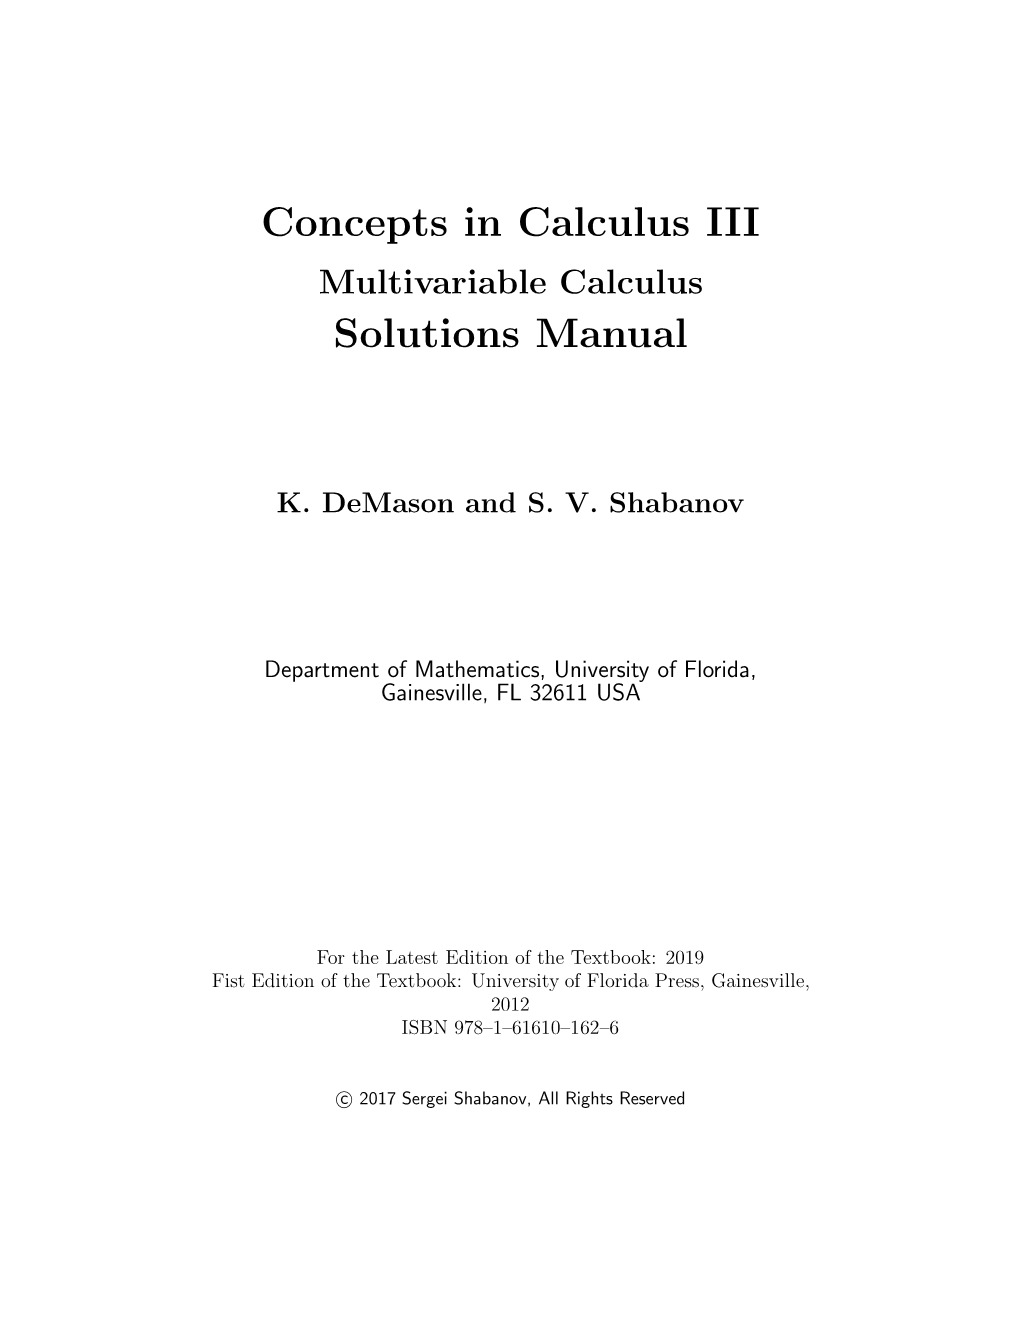 Concepts in Calculus III Solutions Manual